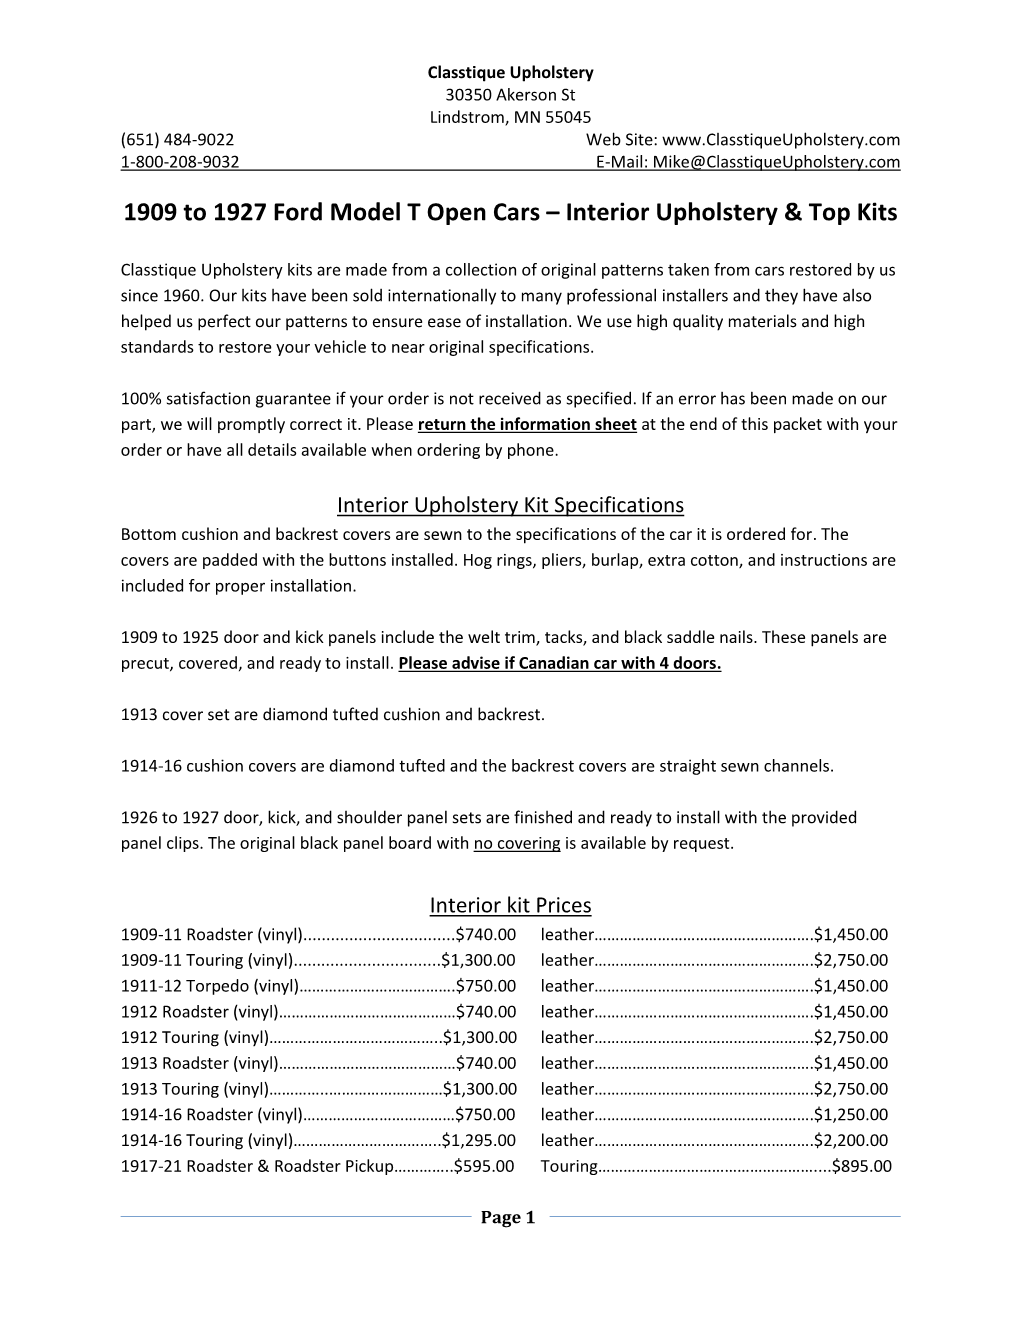 1909 to 1927 Ford Model T Open Cars – Interior Upholstery & Top Kits